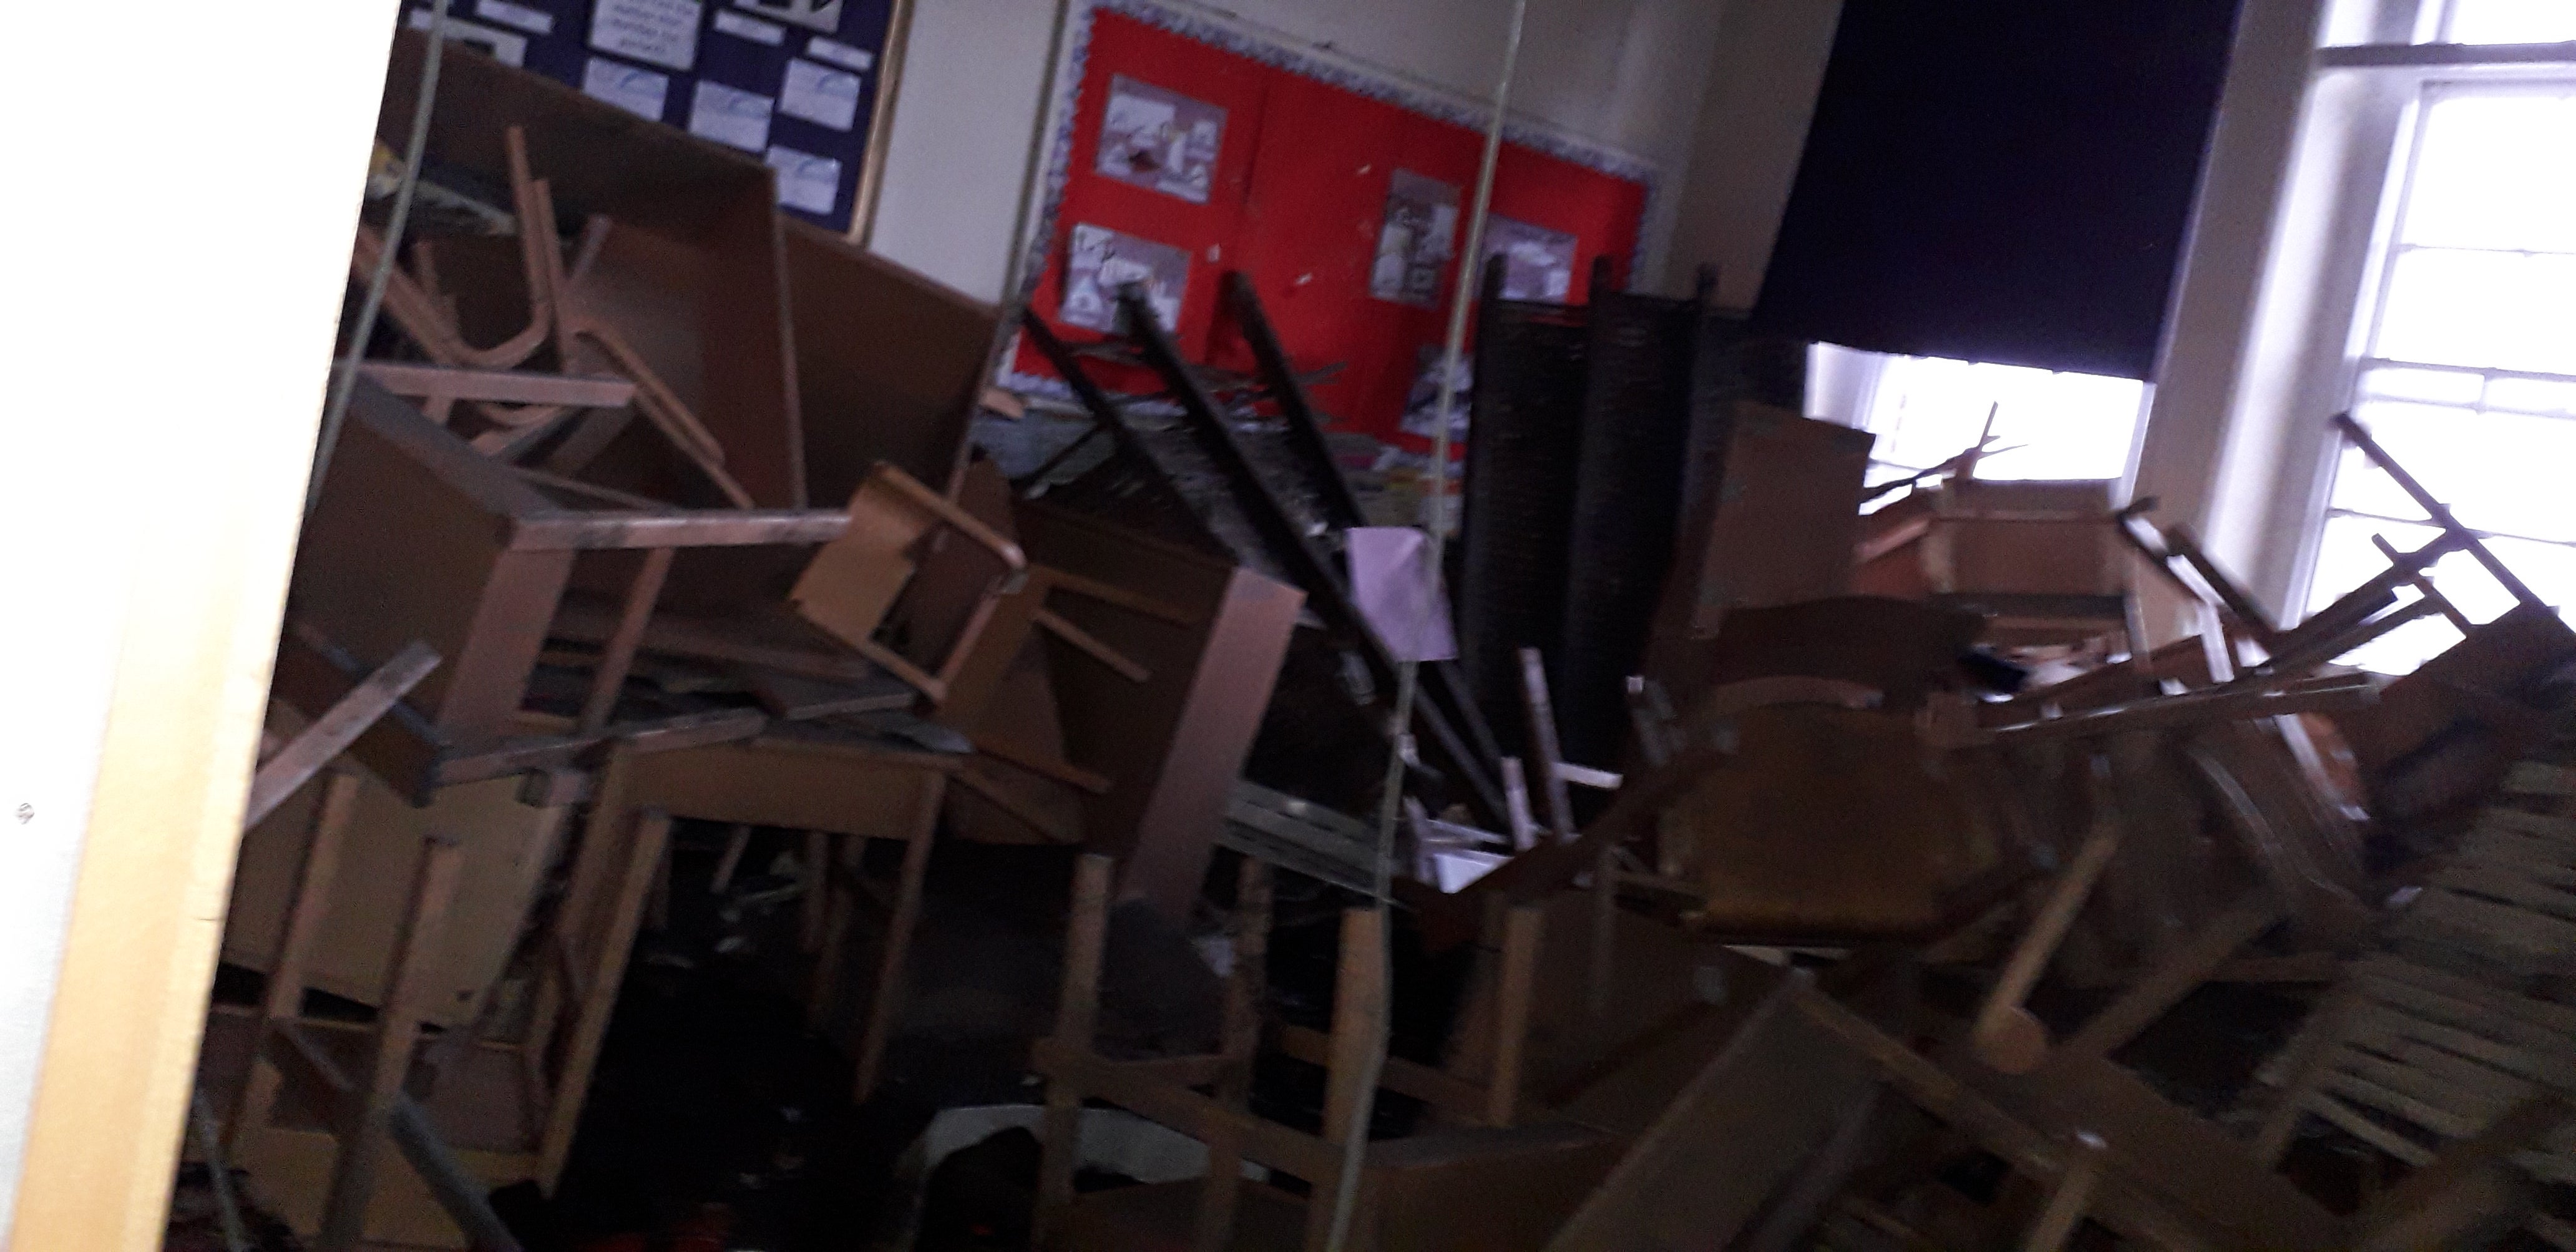 Chairs and desks stored in the attic above fell on the teacher and pupils during a lesson